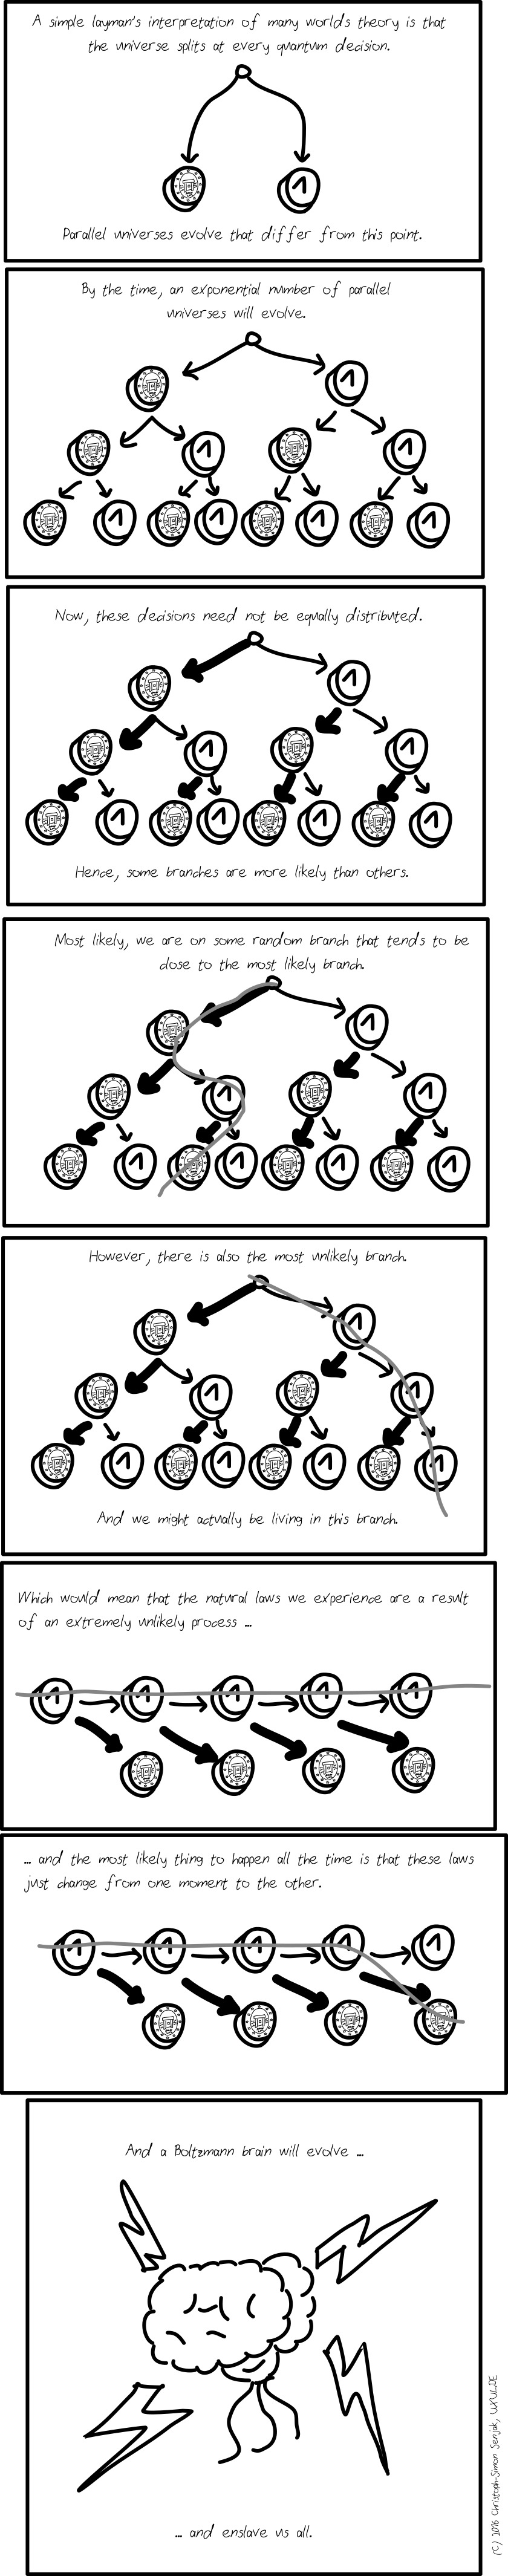 The comic is illustrated with trees in which coins show the outcome of coin flips. The text is: "A simple layman's interpretation of many worlds theory is that the universe splits at every quantum decision. Parallel universes evolve that differ from this point. By the time, an exponential number of parallel universes will evolve. Now, these decisions need not be equally distributed. Hence, some branches are more likely than others. Most likely, we are on some random branch that tends to be close to the most likely branch. However, there is also the most unlikely branch. And we might actually be living in this branch. Which would mean that the natural laws we experience are a result of an extremely unlikely process and the most likely thing to happen all the time is that these laws just change from one moment to the other. And a Boltzmann brain will evolve and enslave us all."